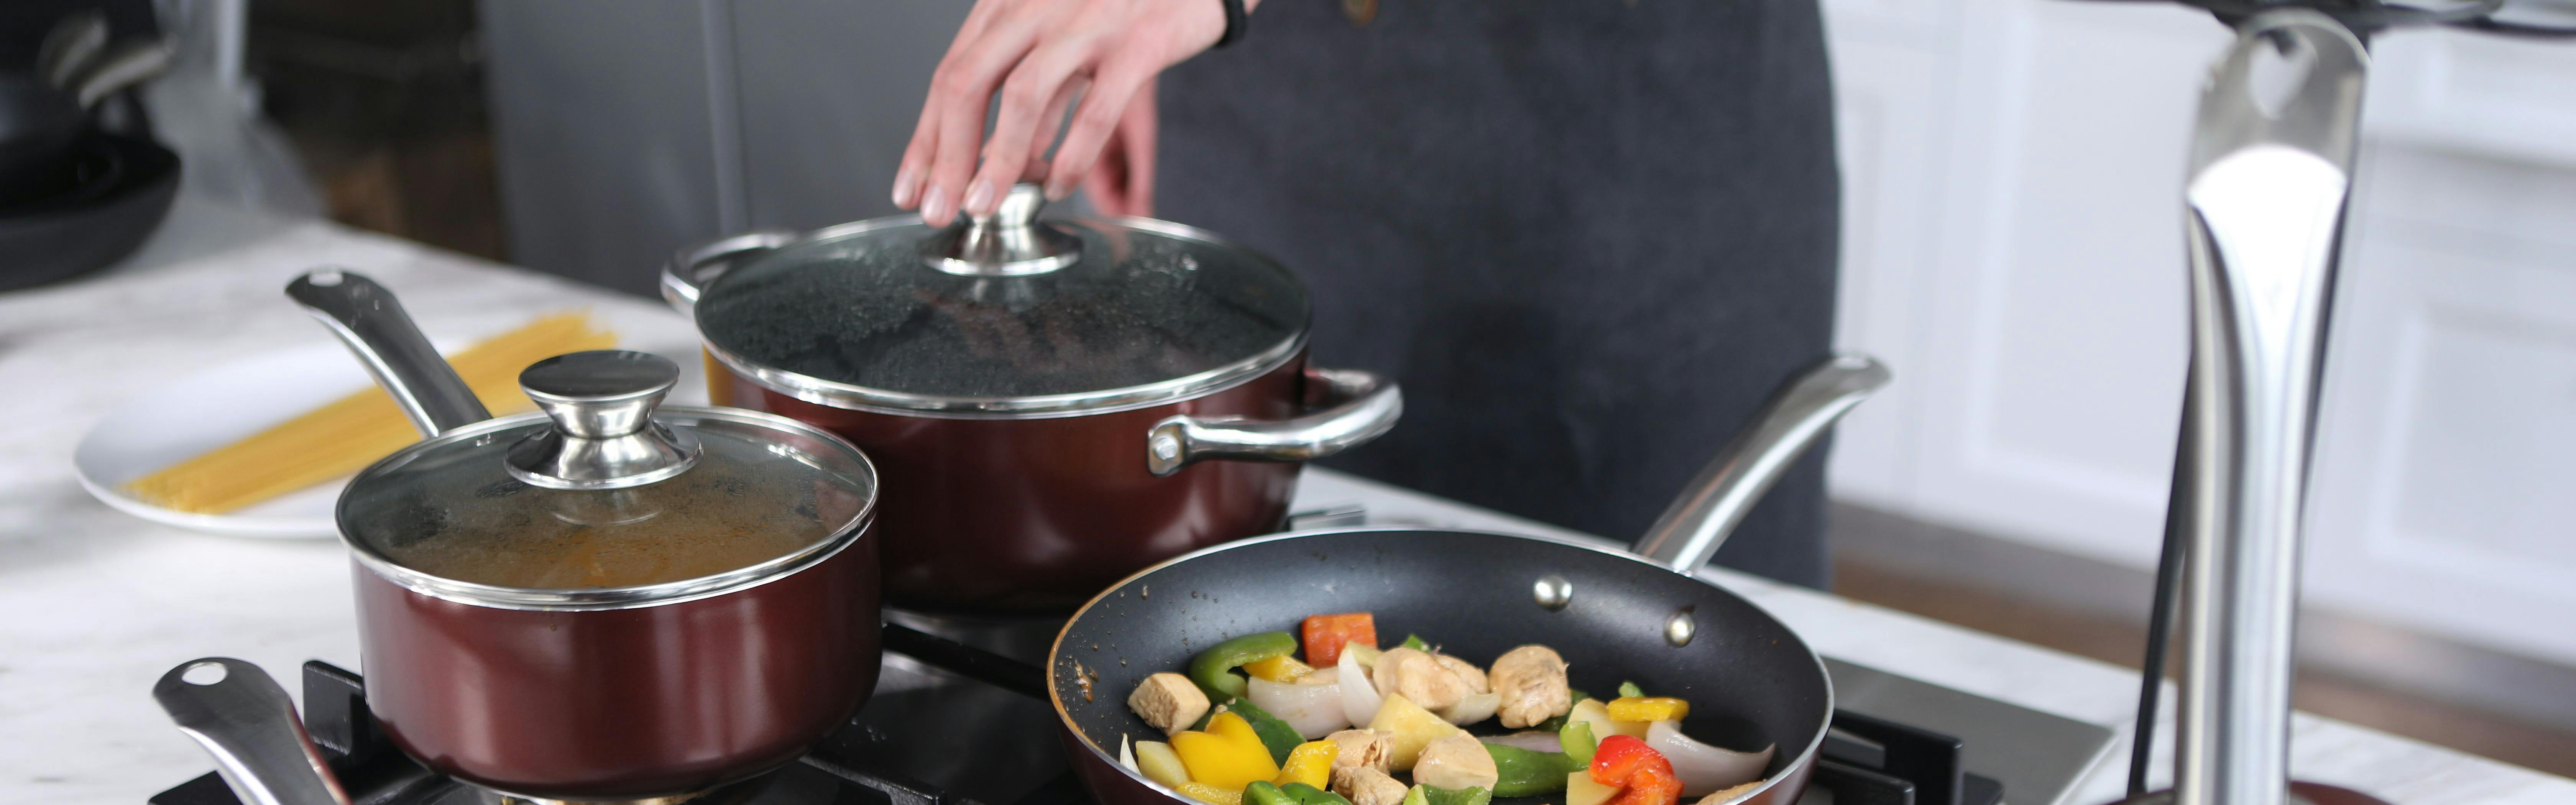 What Is PFOA-Free Cookware? The Facts You Should Know - Prudent Reviews